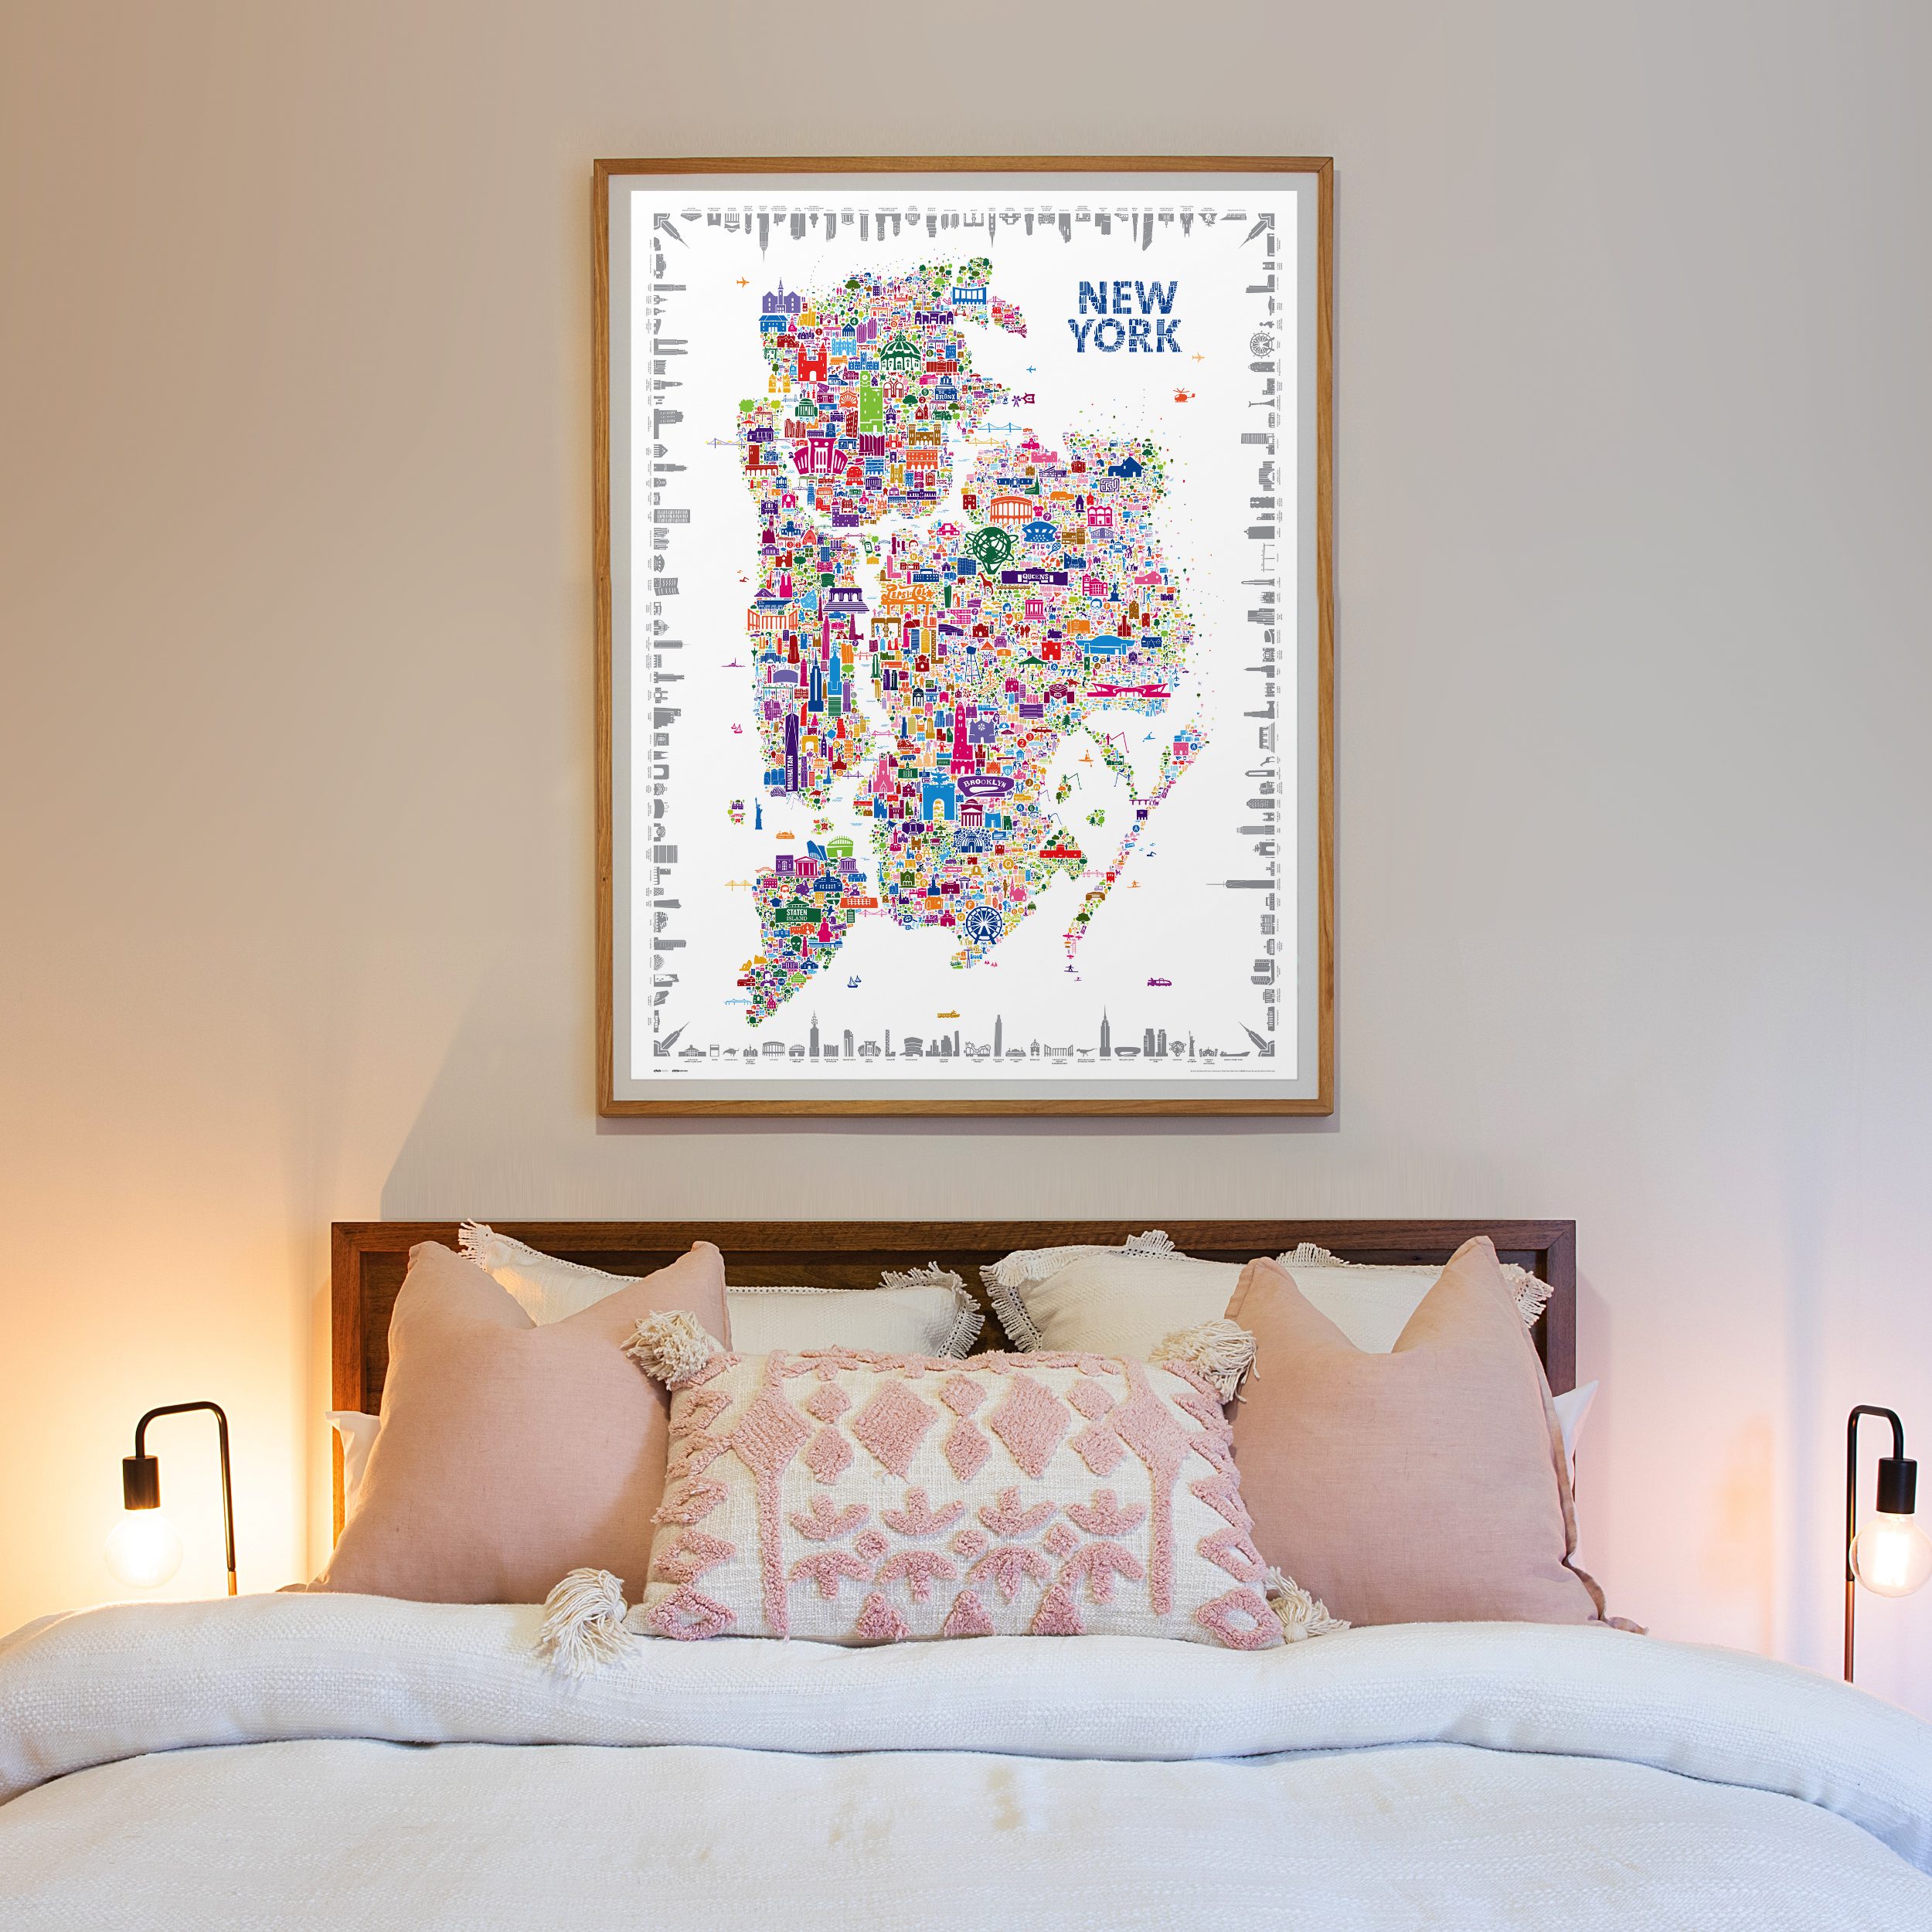 Iconic New York City five boroughs Map Modern Poster Print for Living Room Bedroom Home Office dorm apartment Kitchen NYC Artwork souvenir Prints Aesthetic Style Decor colorful Large Vintage Cool Wall Art bronx brooklyn manhattan queens staten island